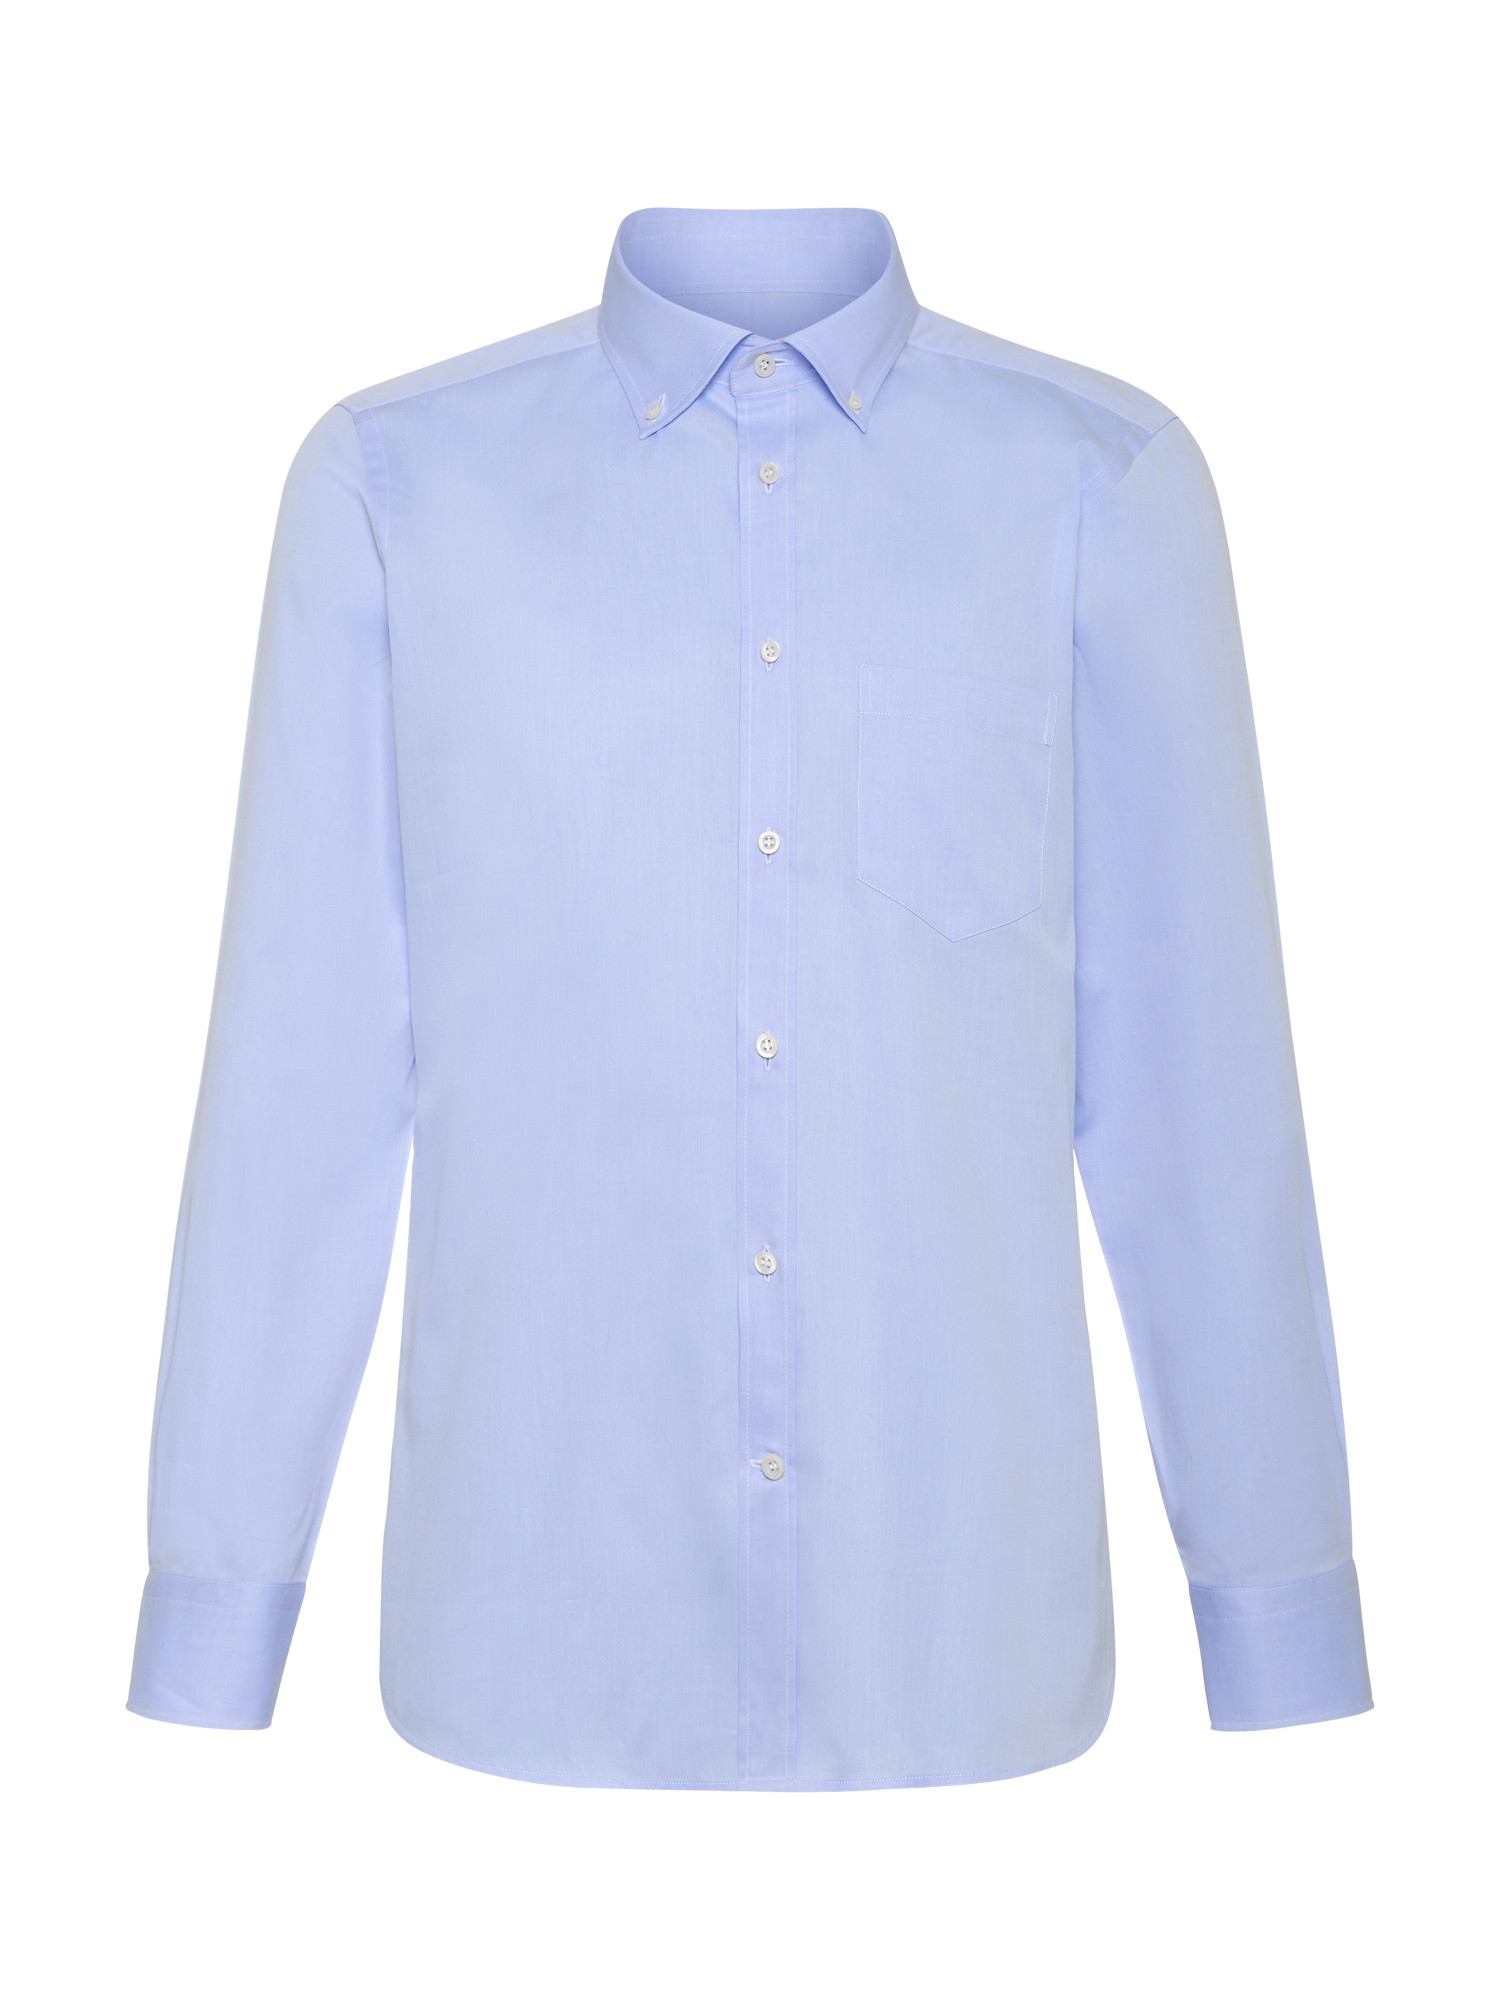 Luca D'Altieri - Casual slim fit shirt in pure cotton twill, Light Blue, large image number 1